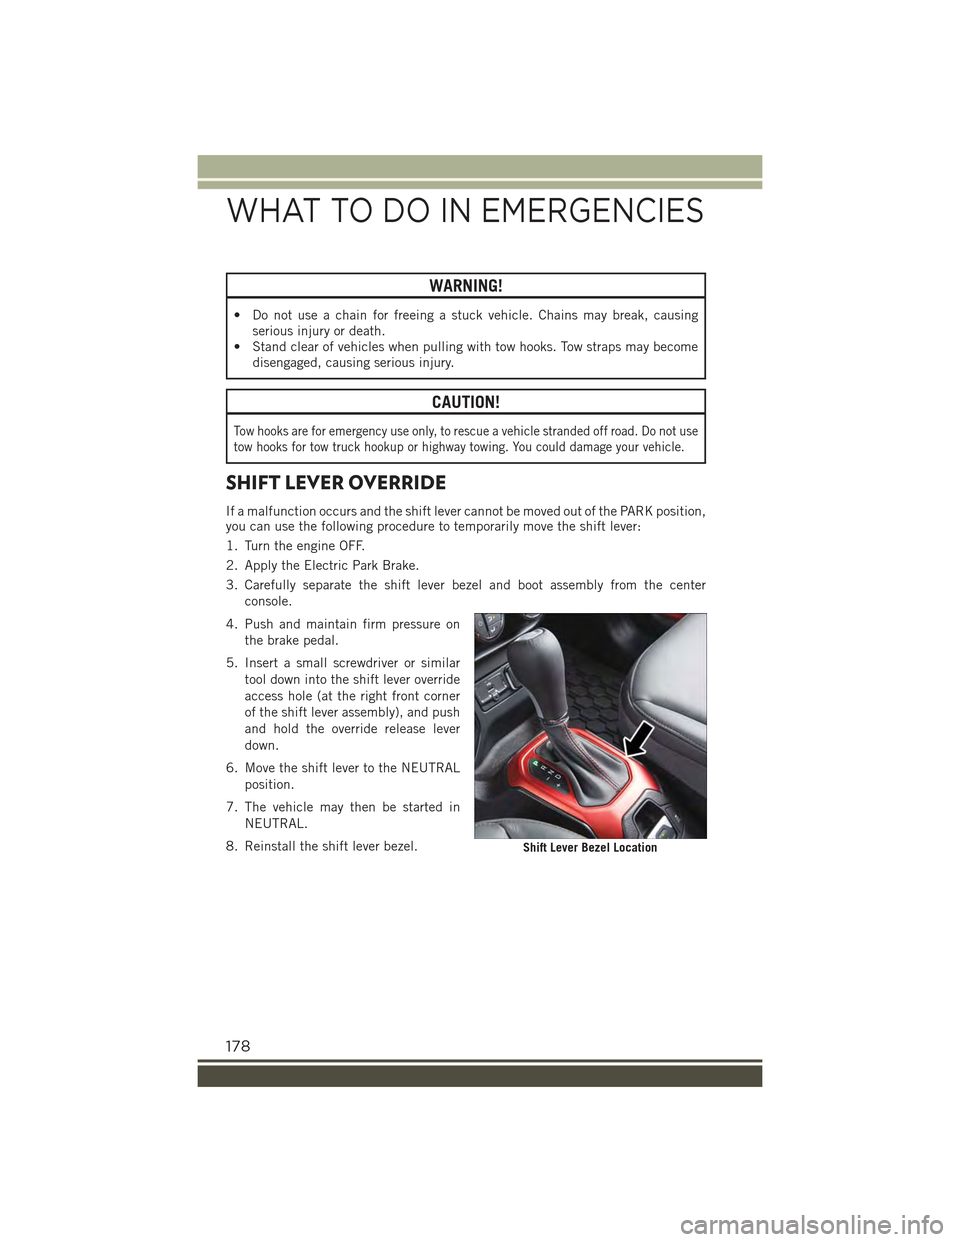 JEEP RENEGADE 2015 1.G User Guide WARNING!
• Do not use a chain for freeing a stuck vehicle. Chains may break, causingserious injury or death.
• Stand clear of vehicles when pulling with tow hooks. Tow straps may becomedisengaged,